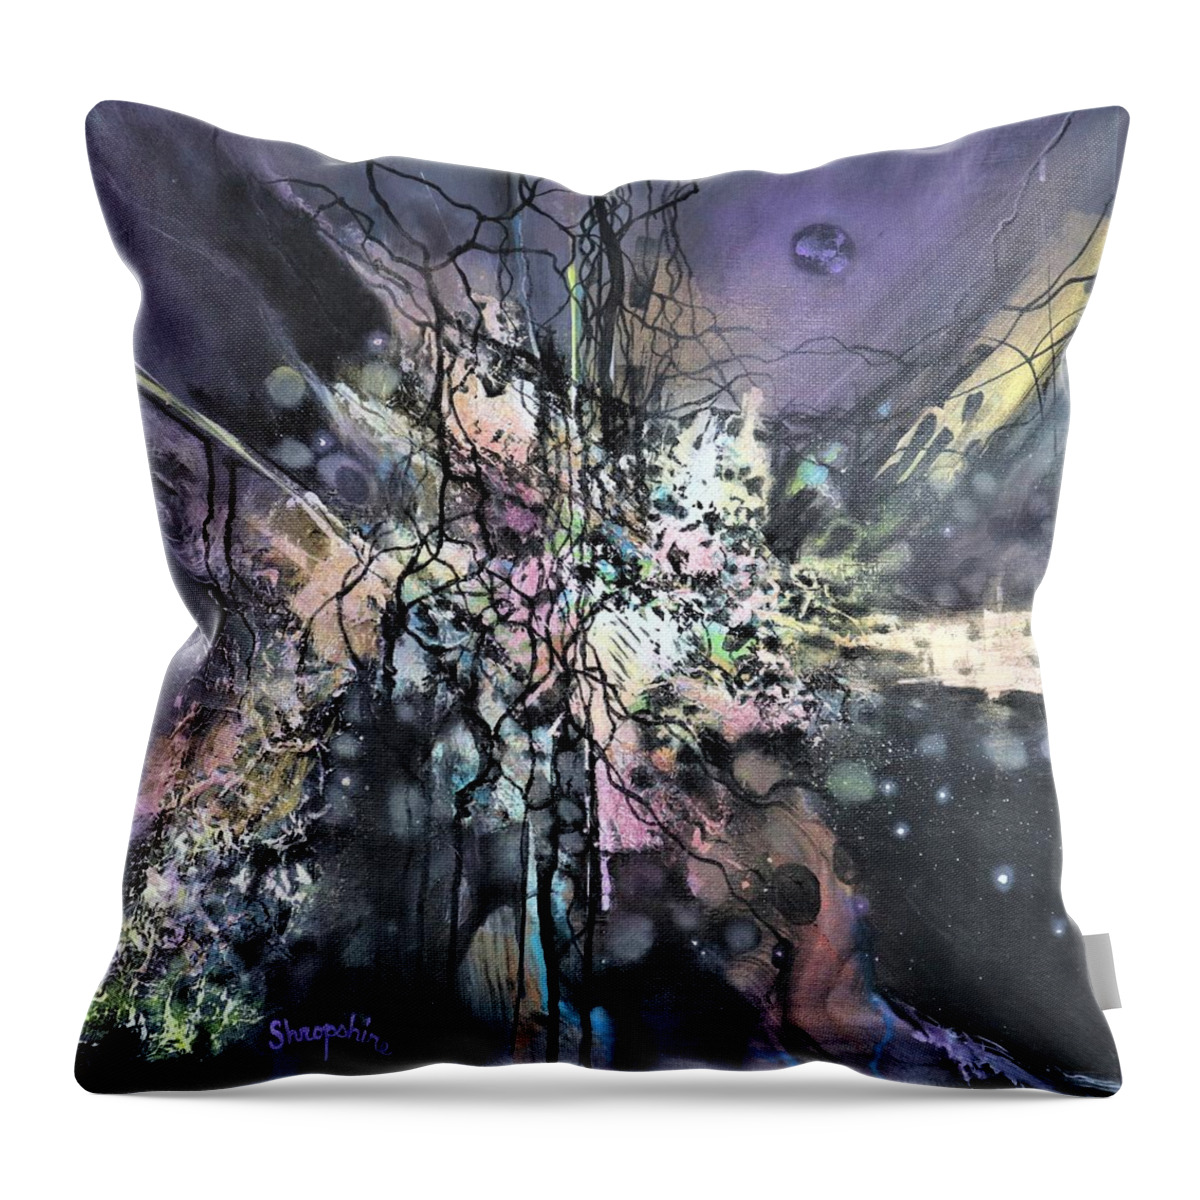 Abstract Throw Pillow featuring the painting Chaos by Tom Shropshire